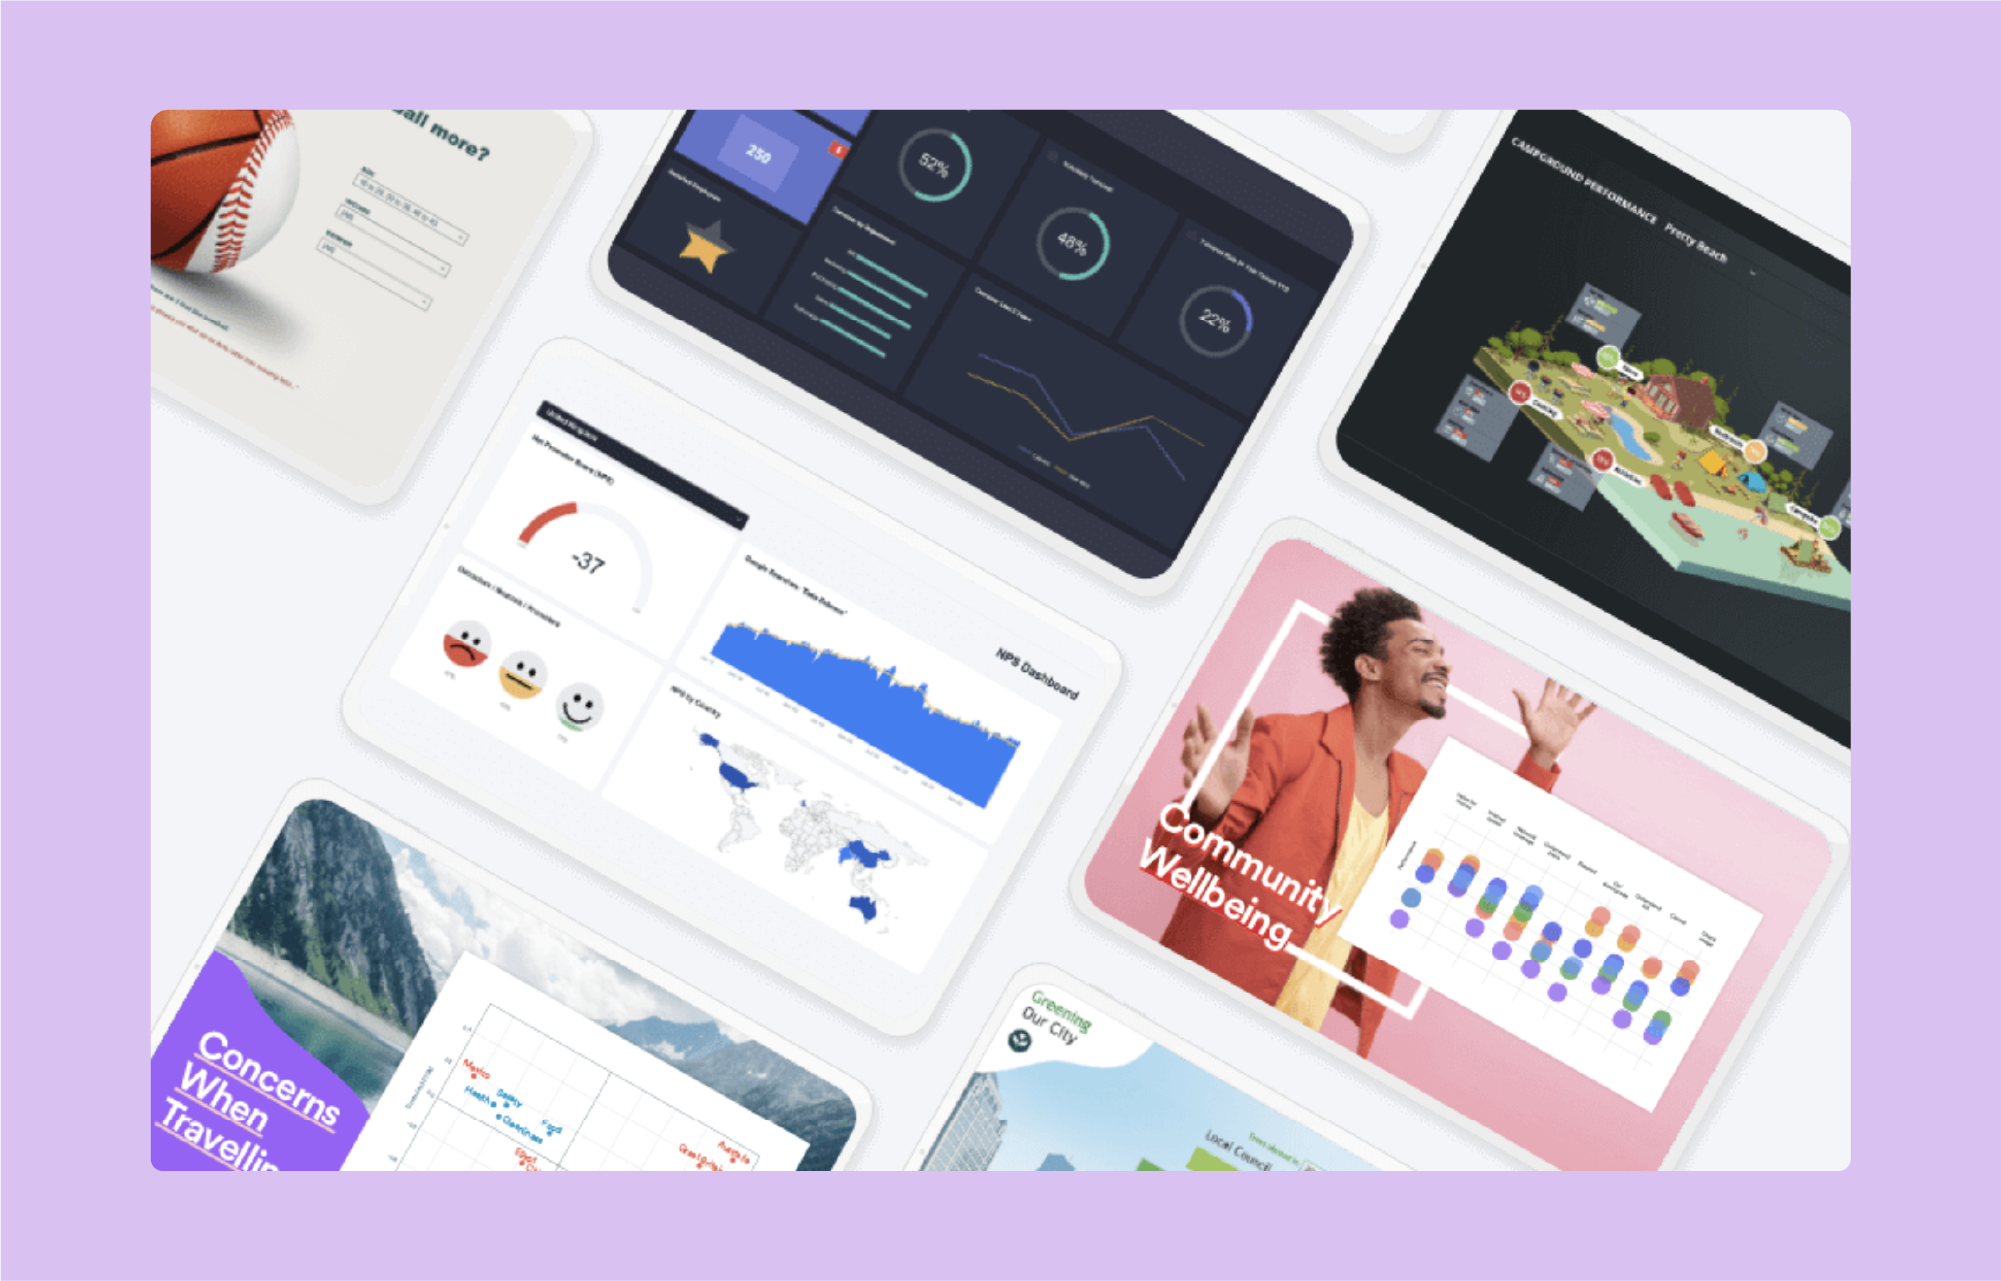 Displayr Software - Easily create beautiful, interactive dashboards and online reports. Empower viewers to self-serve with interactive visualizations, filter-based queries, and easy-to-use calculators. Build your dashboard once and automatically update it forever.